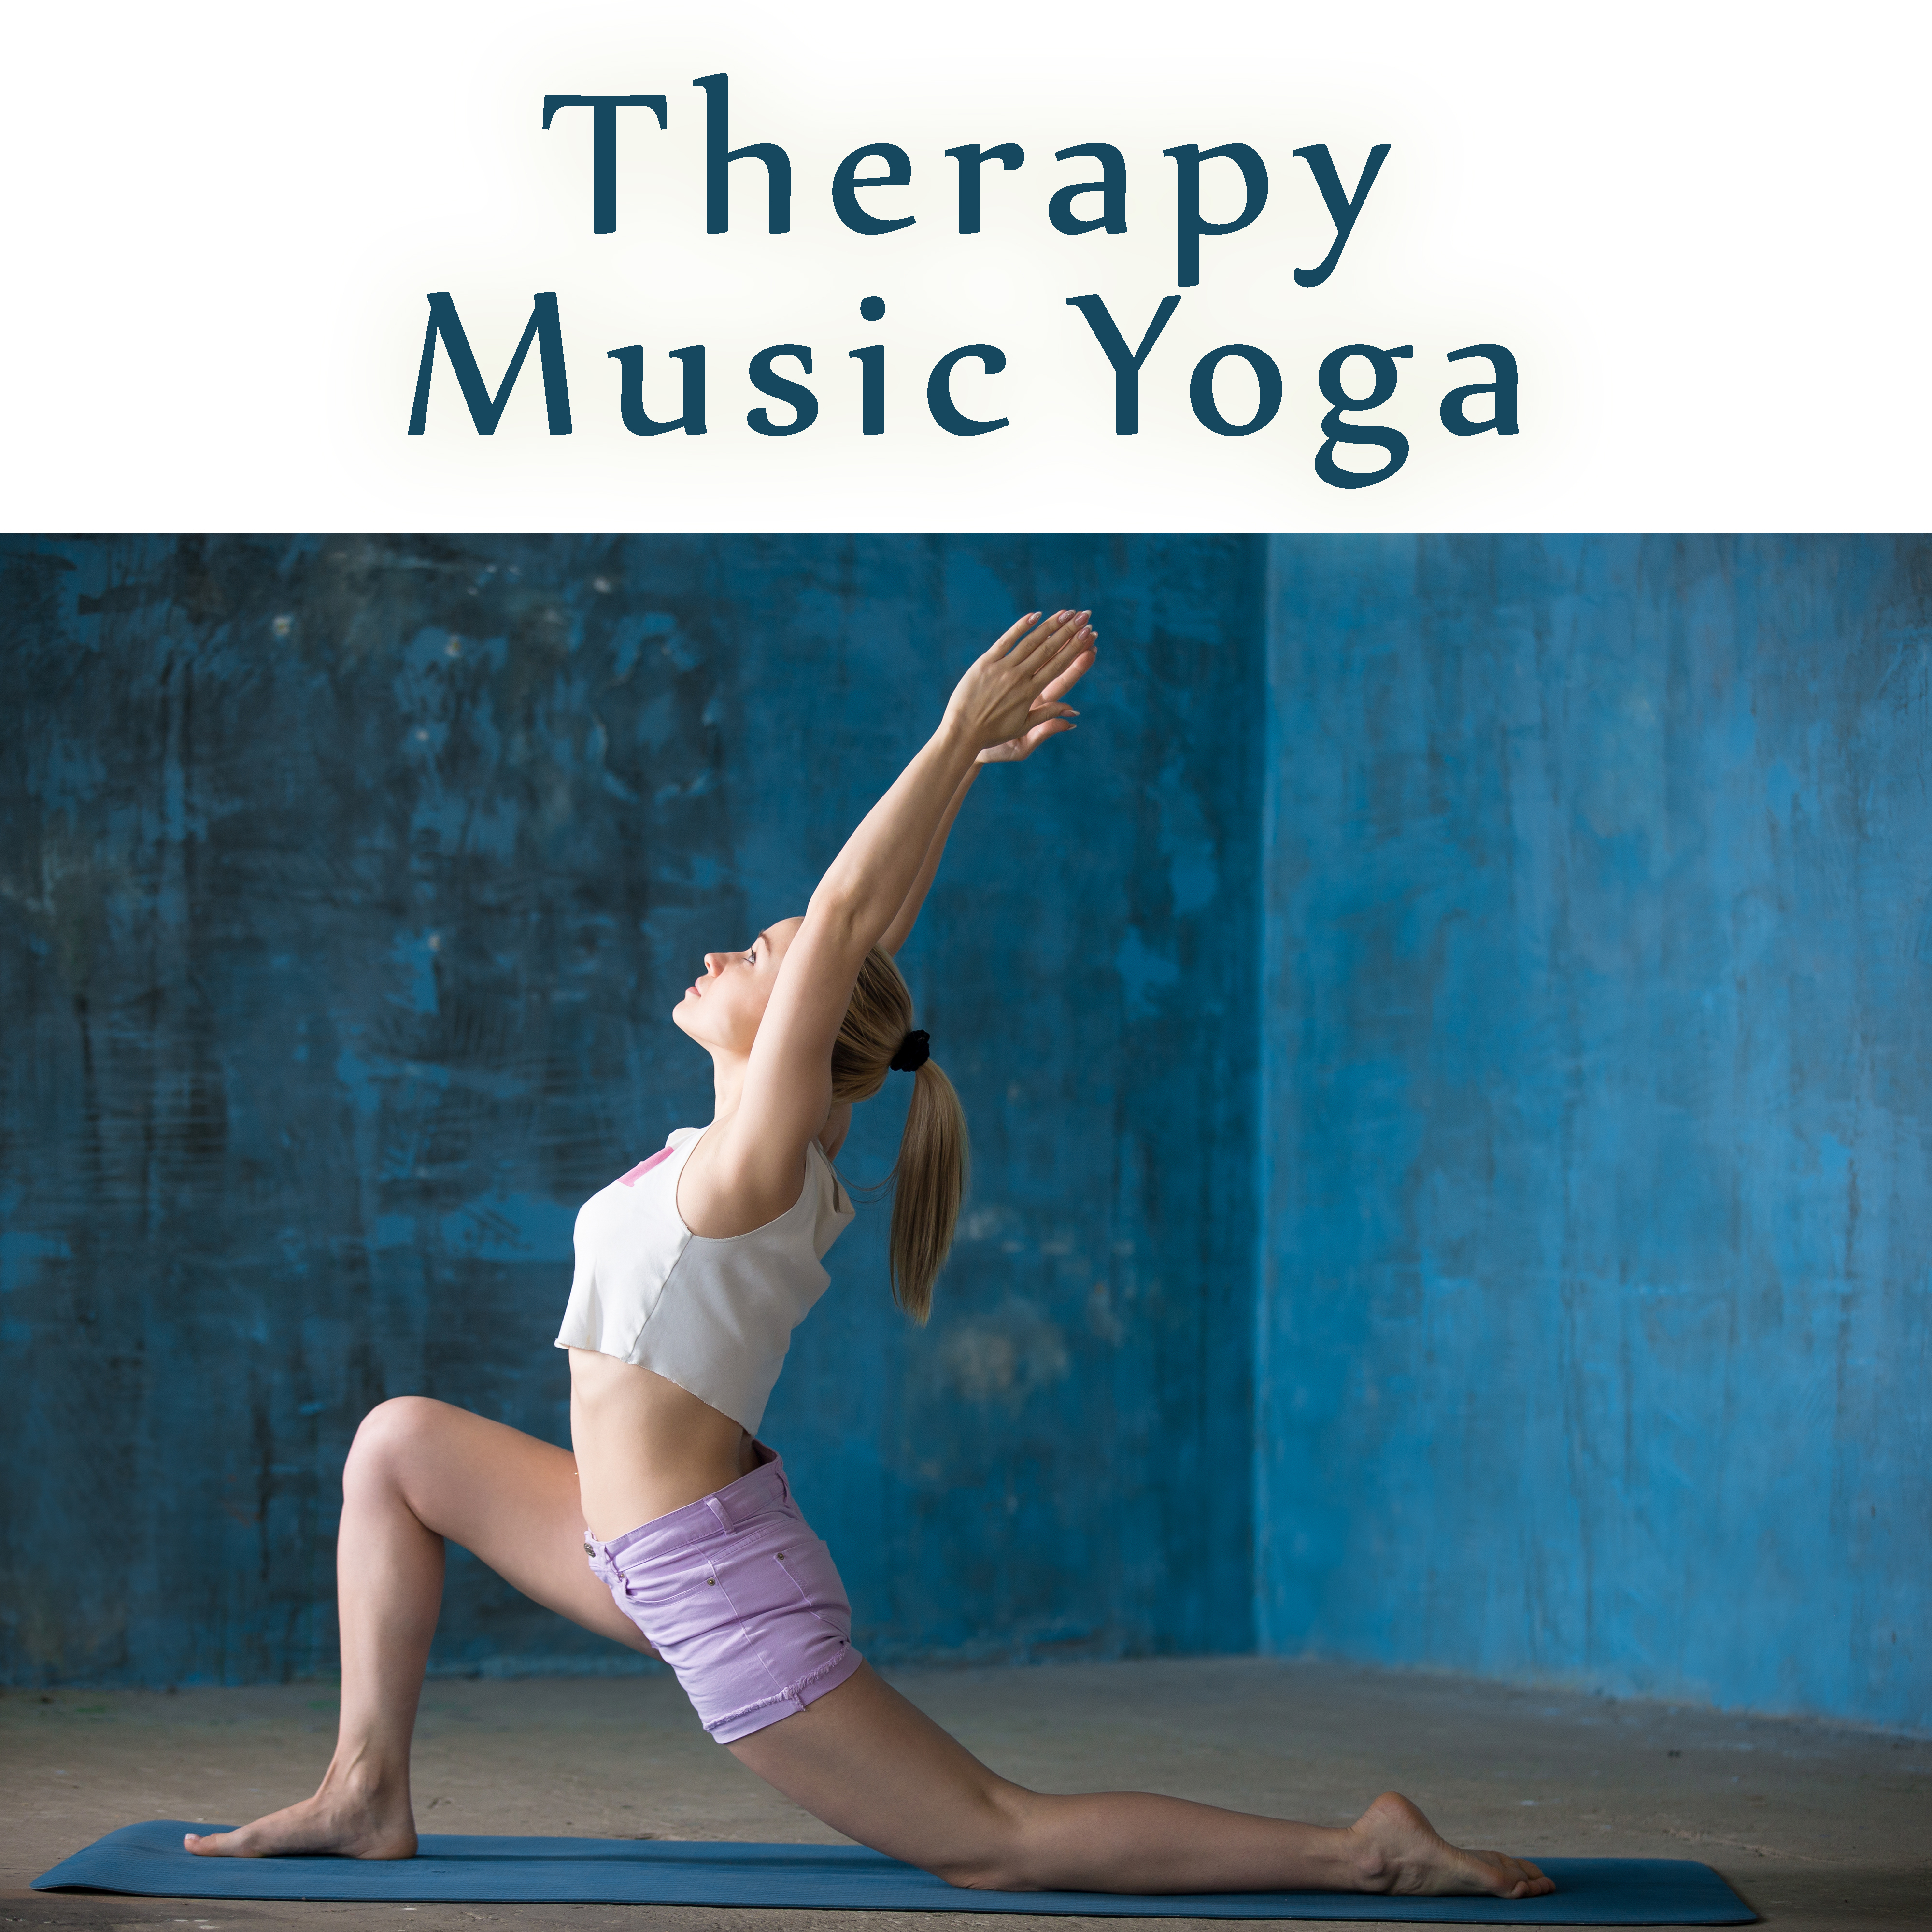 Therapy Music Yoga